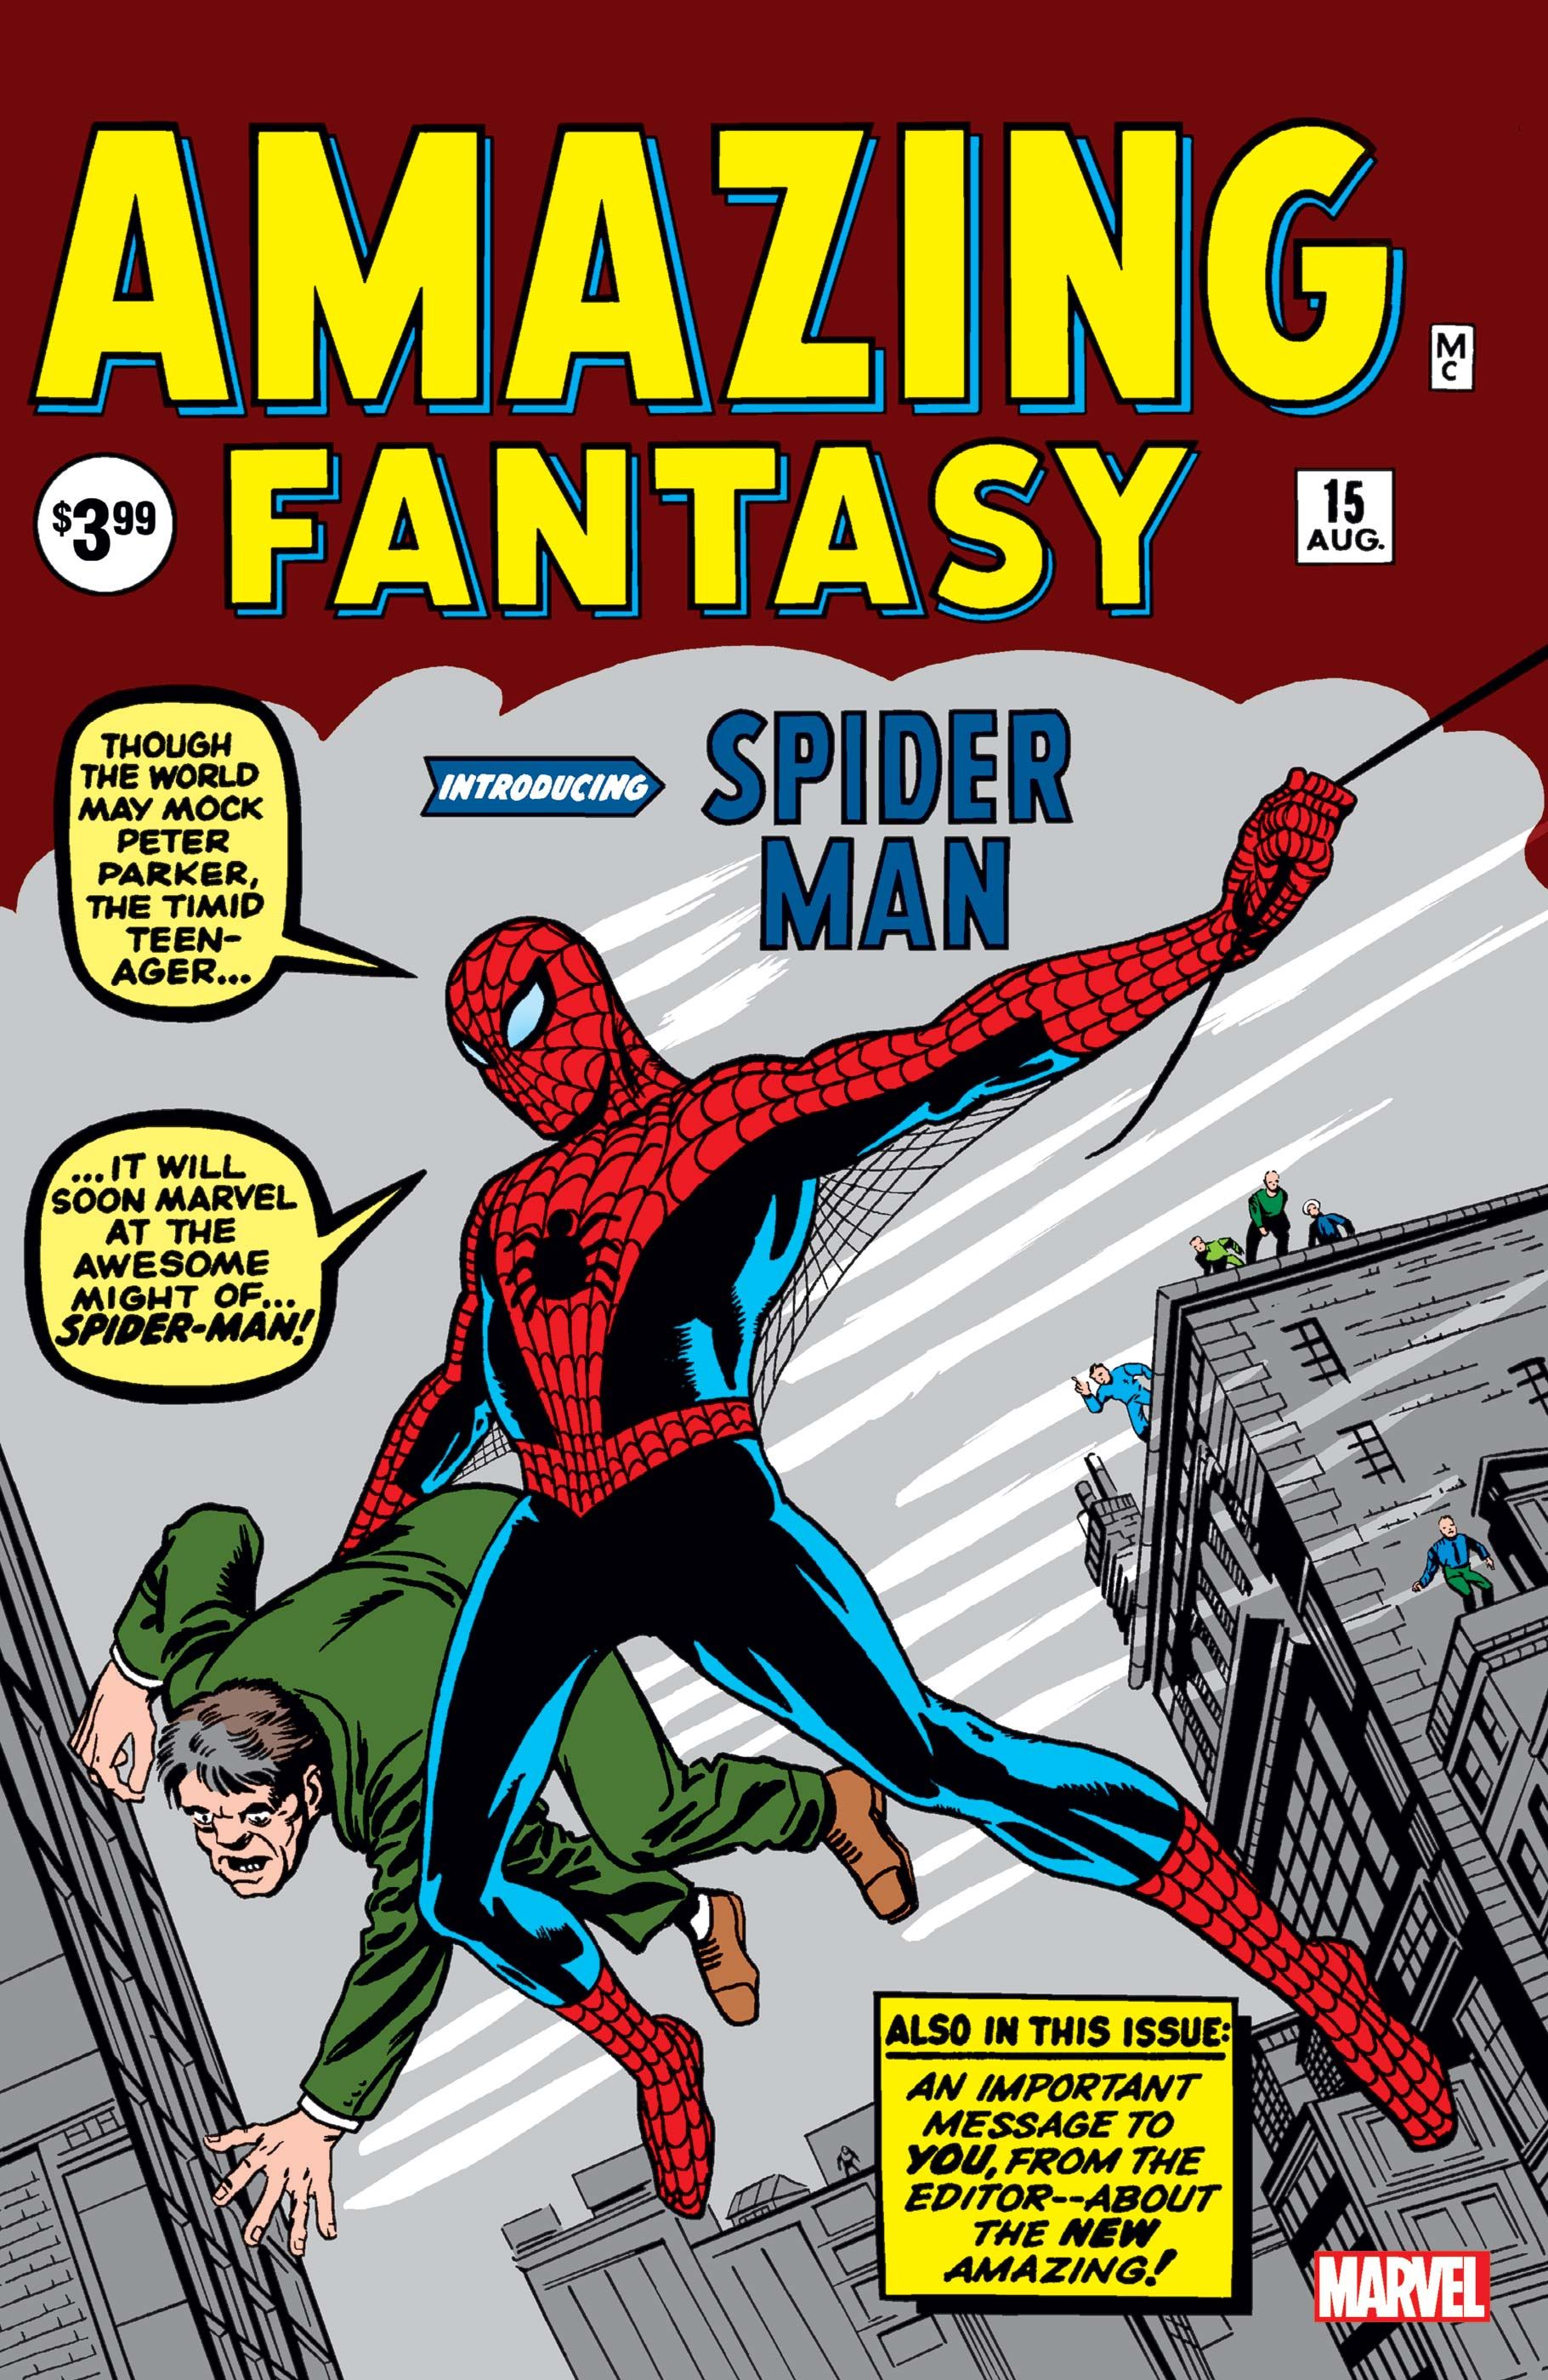 amazing fantasy 15 cover spider-man swinging on a web holding a man